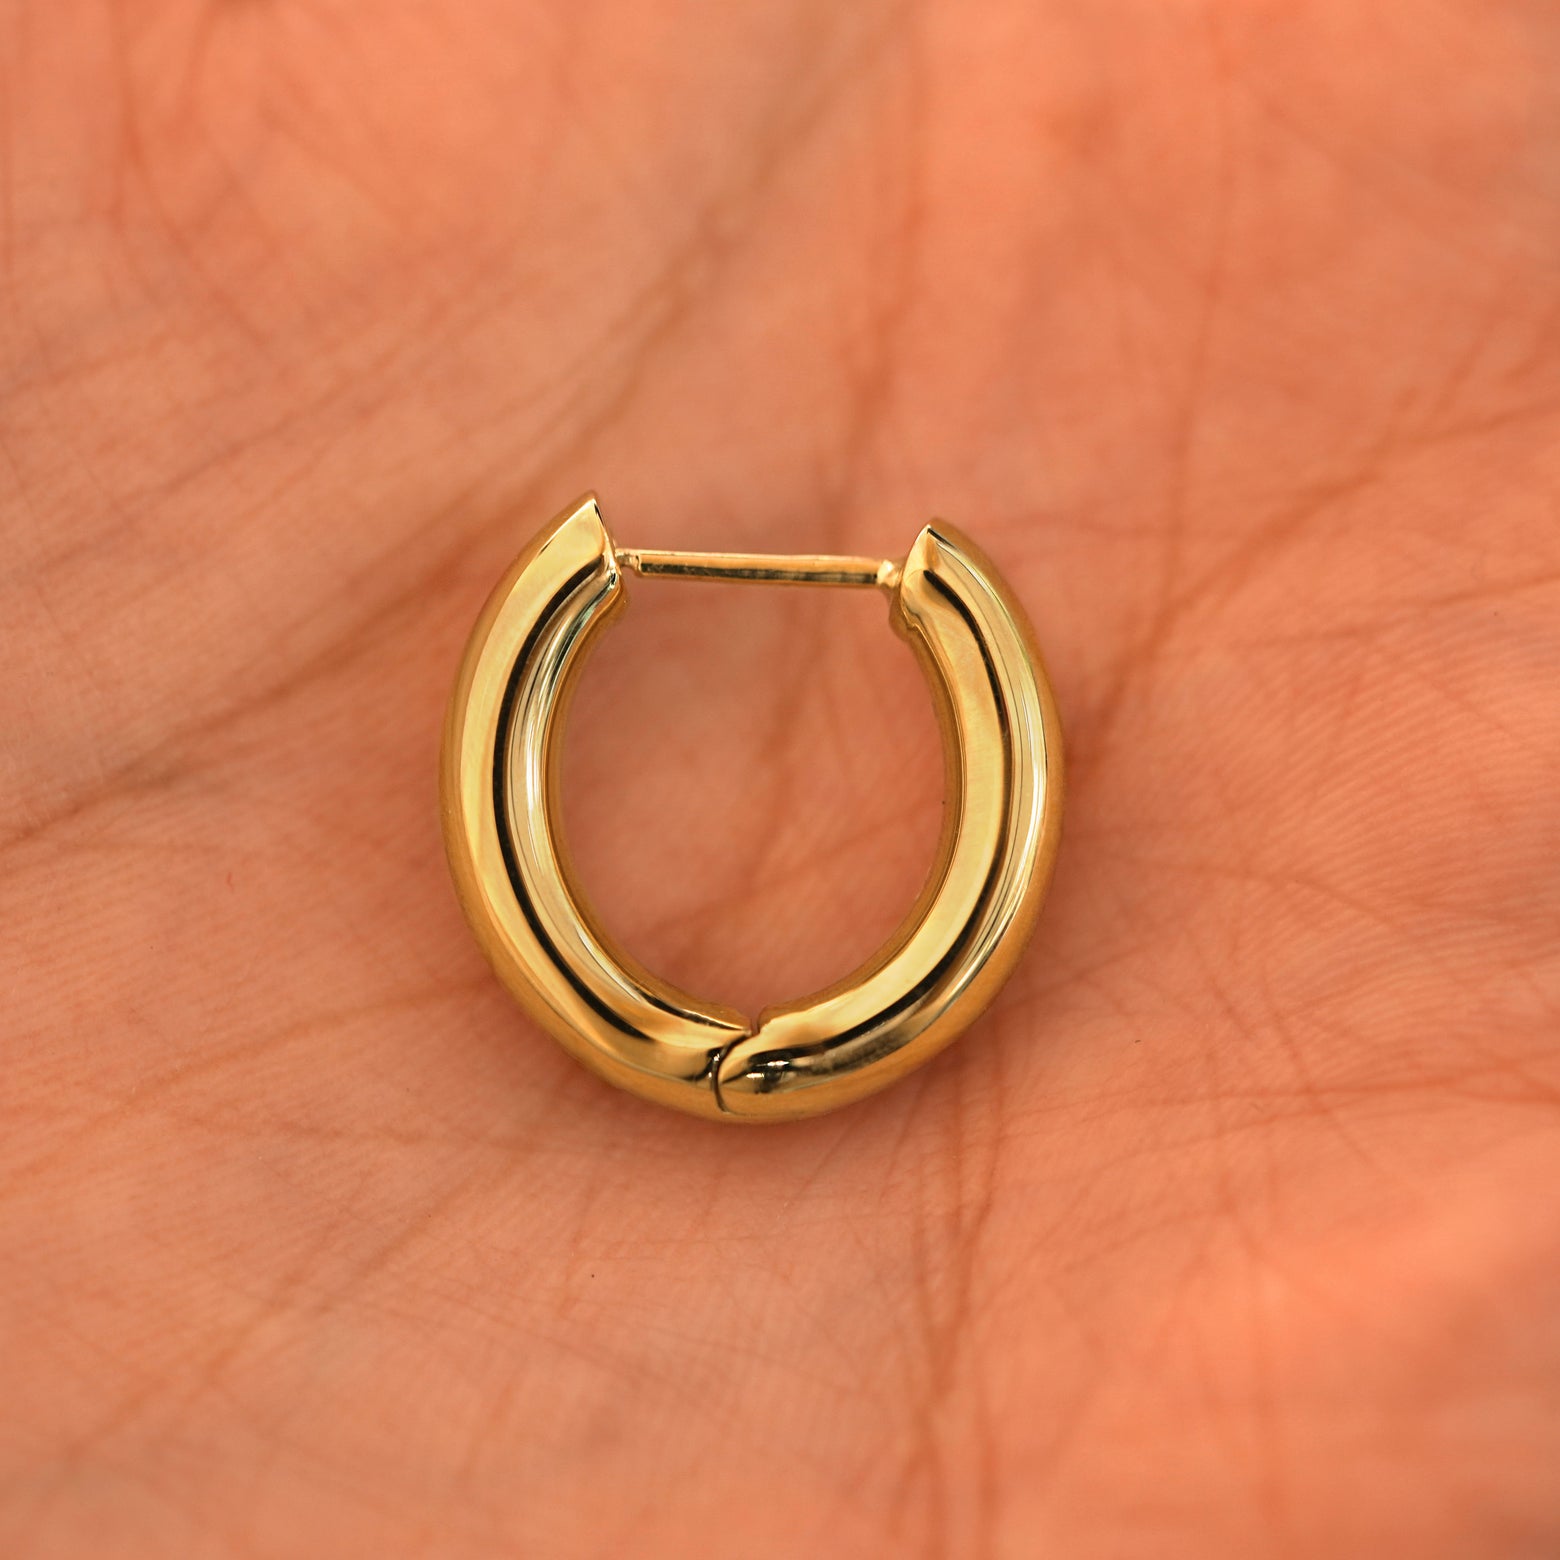 A closed single 14k yellow gold Chunky Oval Huggie Hoop resting in a model's palm